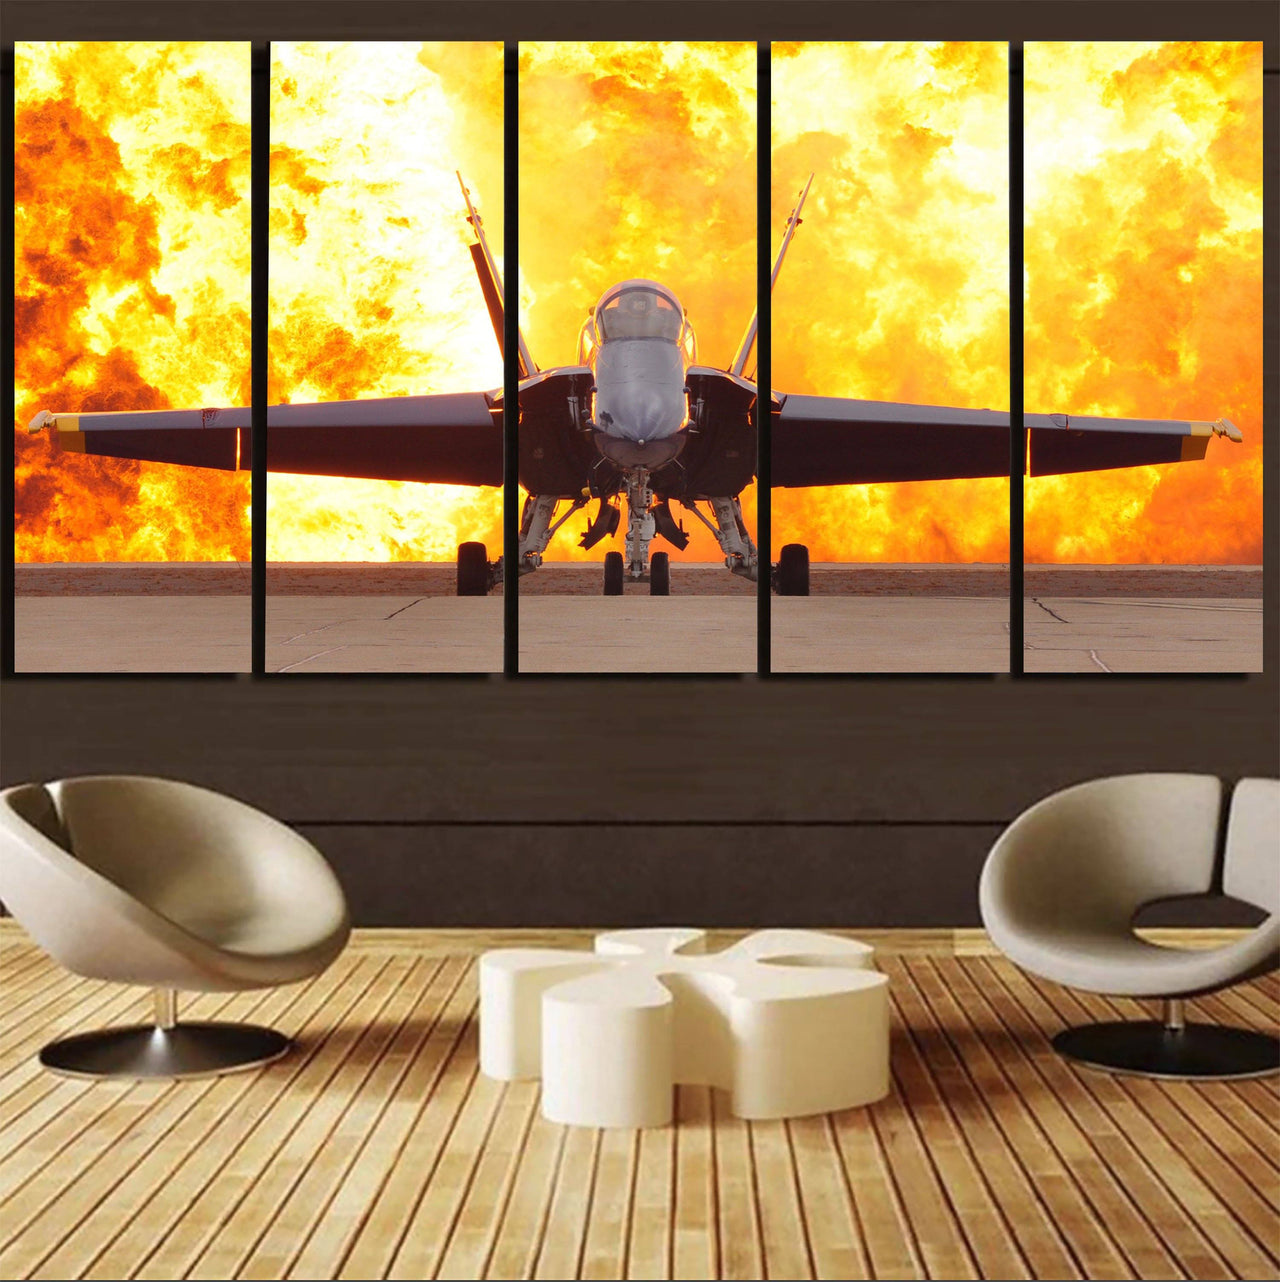 Face to Face with Air Force Jet & Flames Printed Canvas Prints (5 Pieces) Aviation Shop 